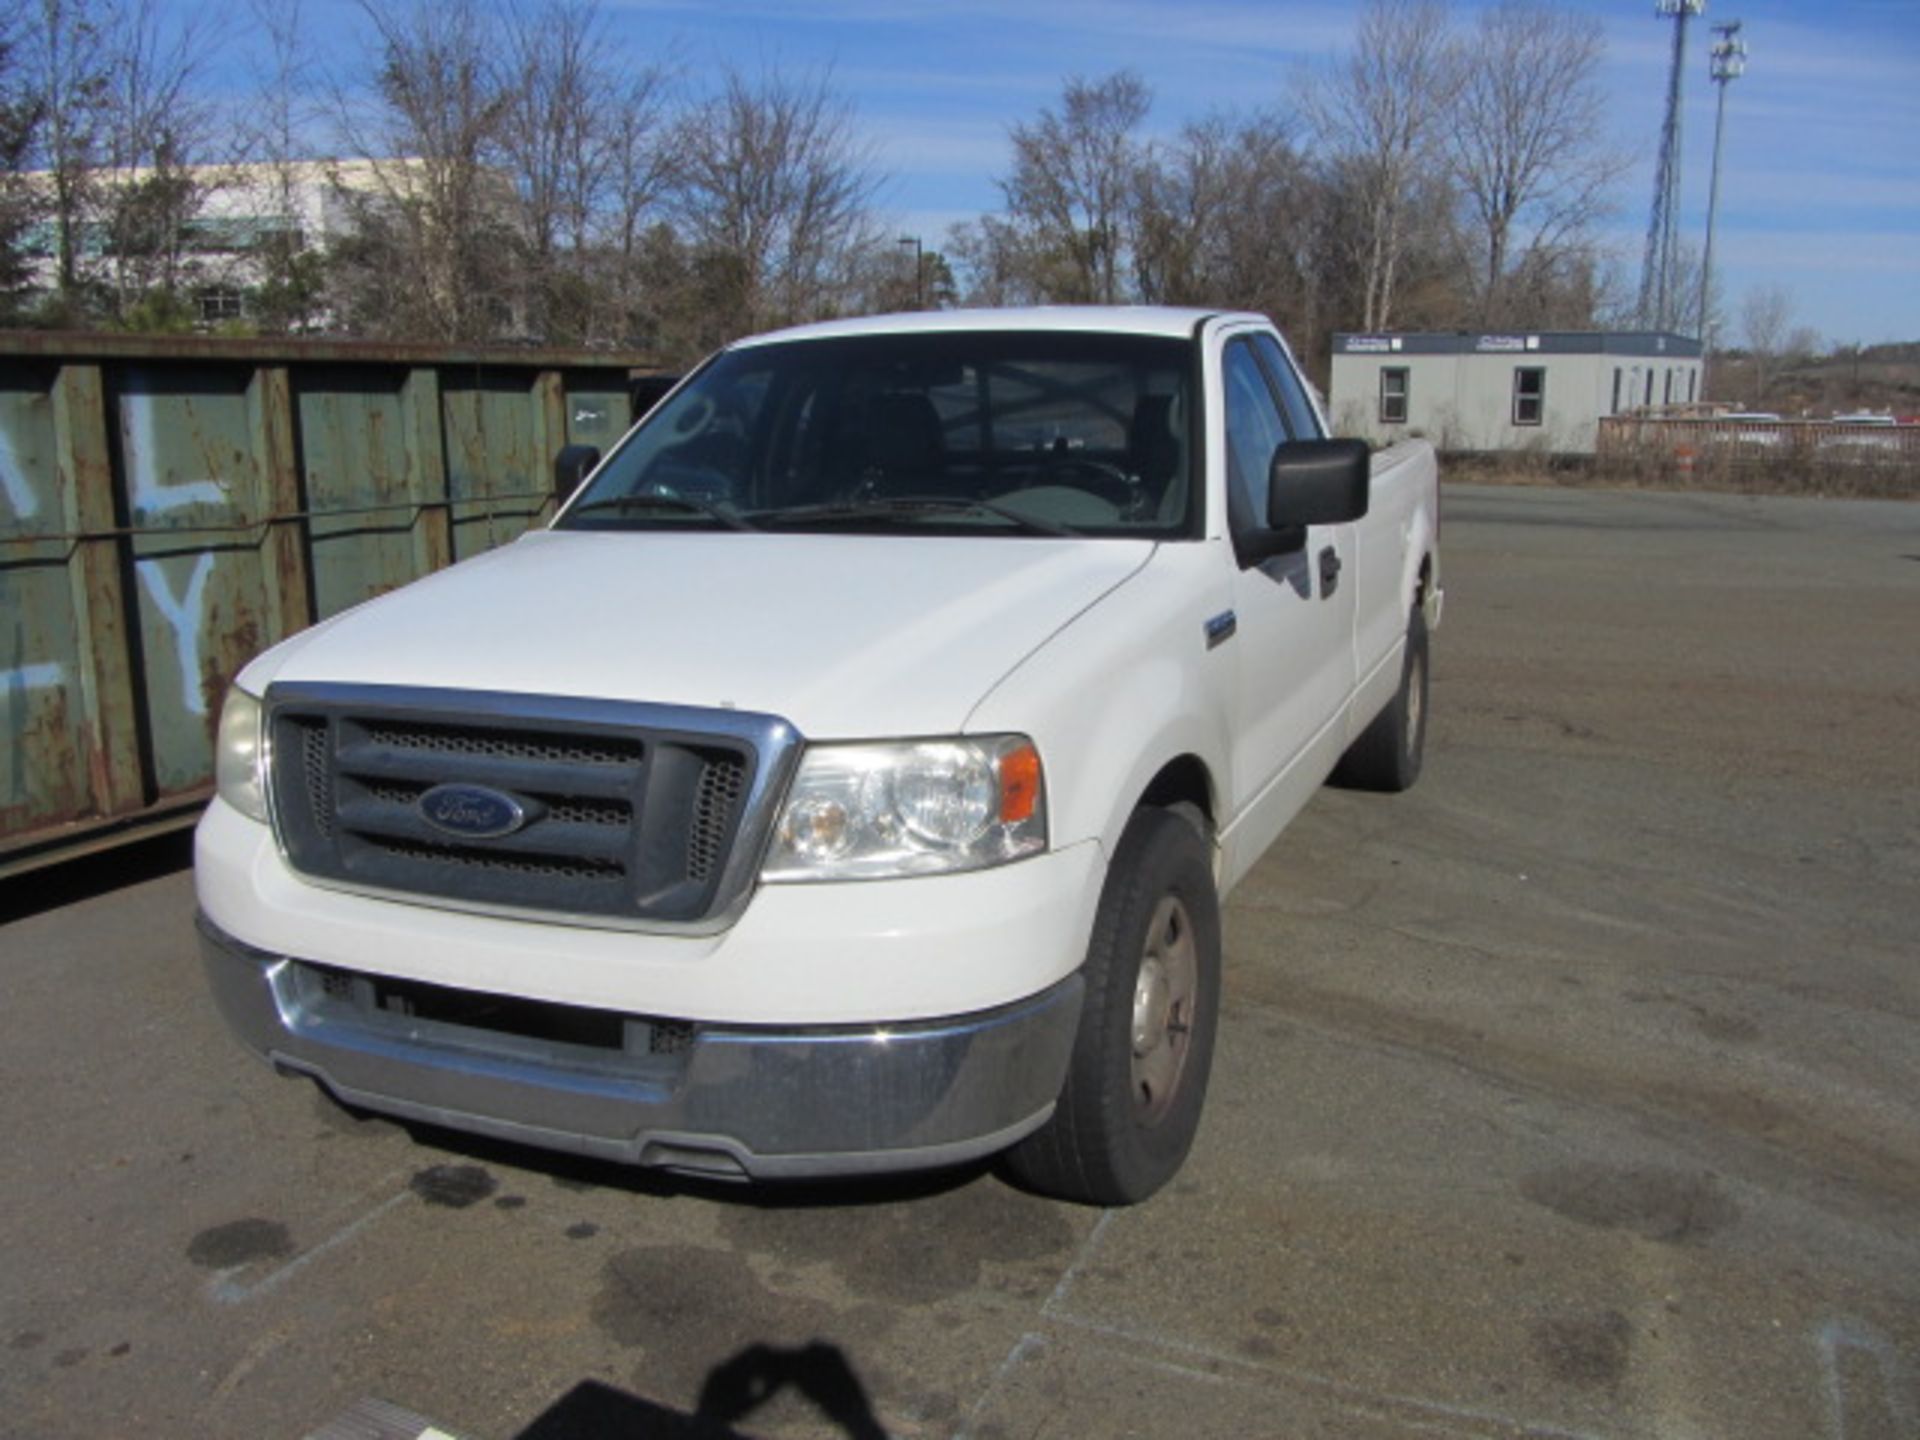 Ford F-150 XLT Triton Pick-Up Truck with 8' Bed, Automatic Transmission, AC & Heat, vin: - Image 3 of 8